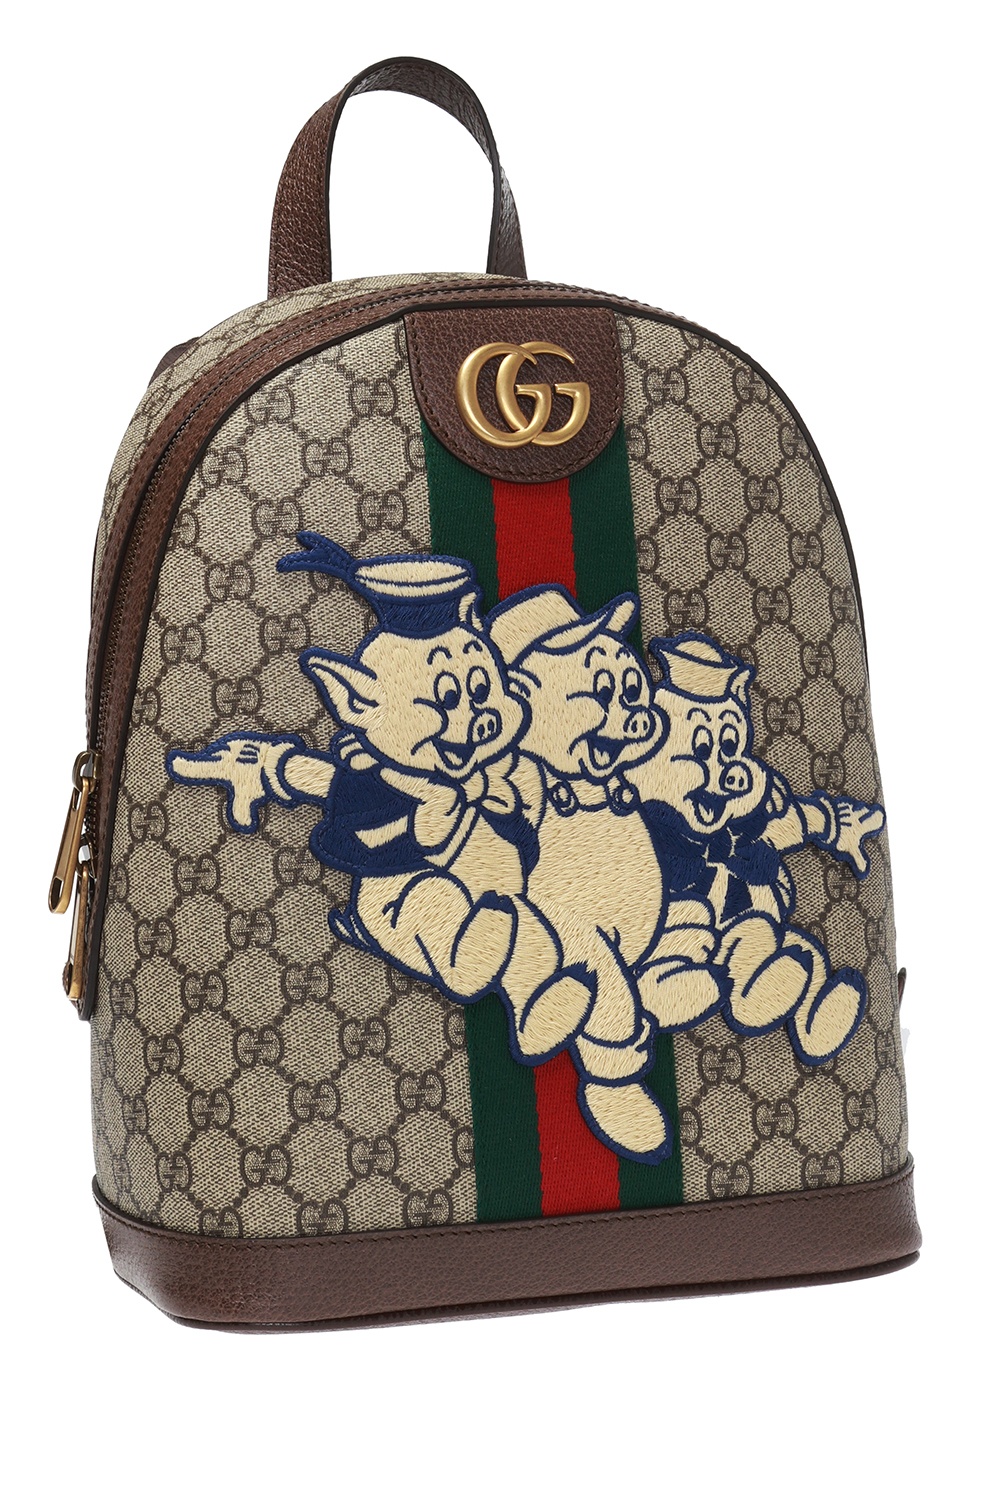 gucci backpack pig